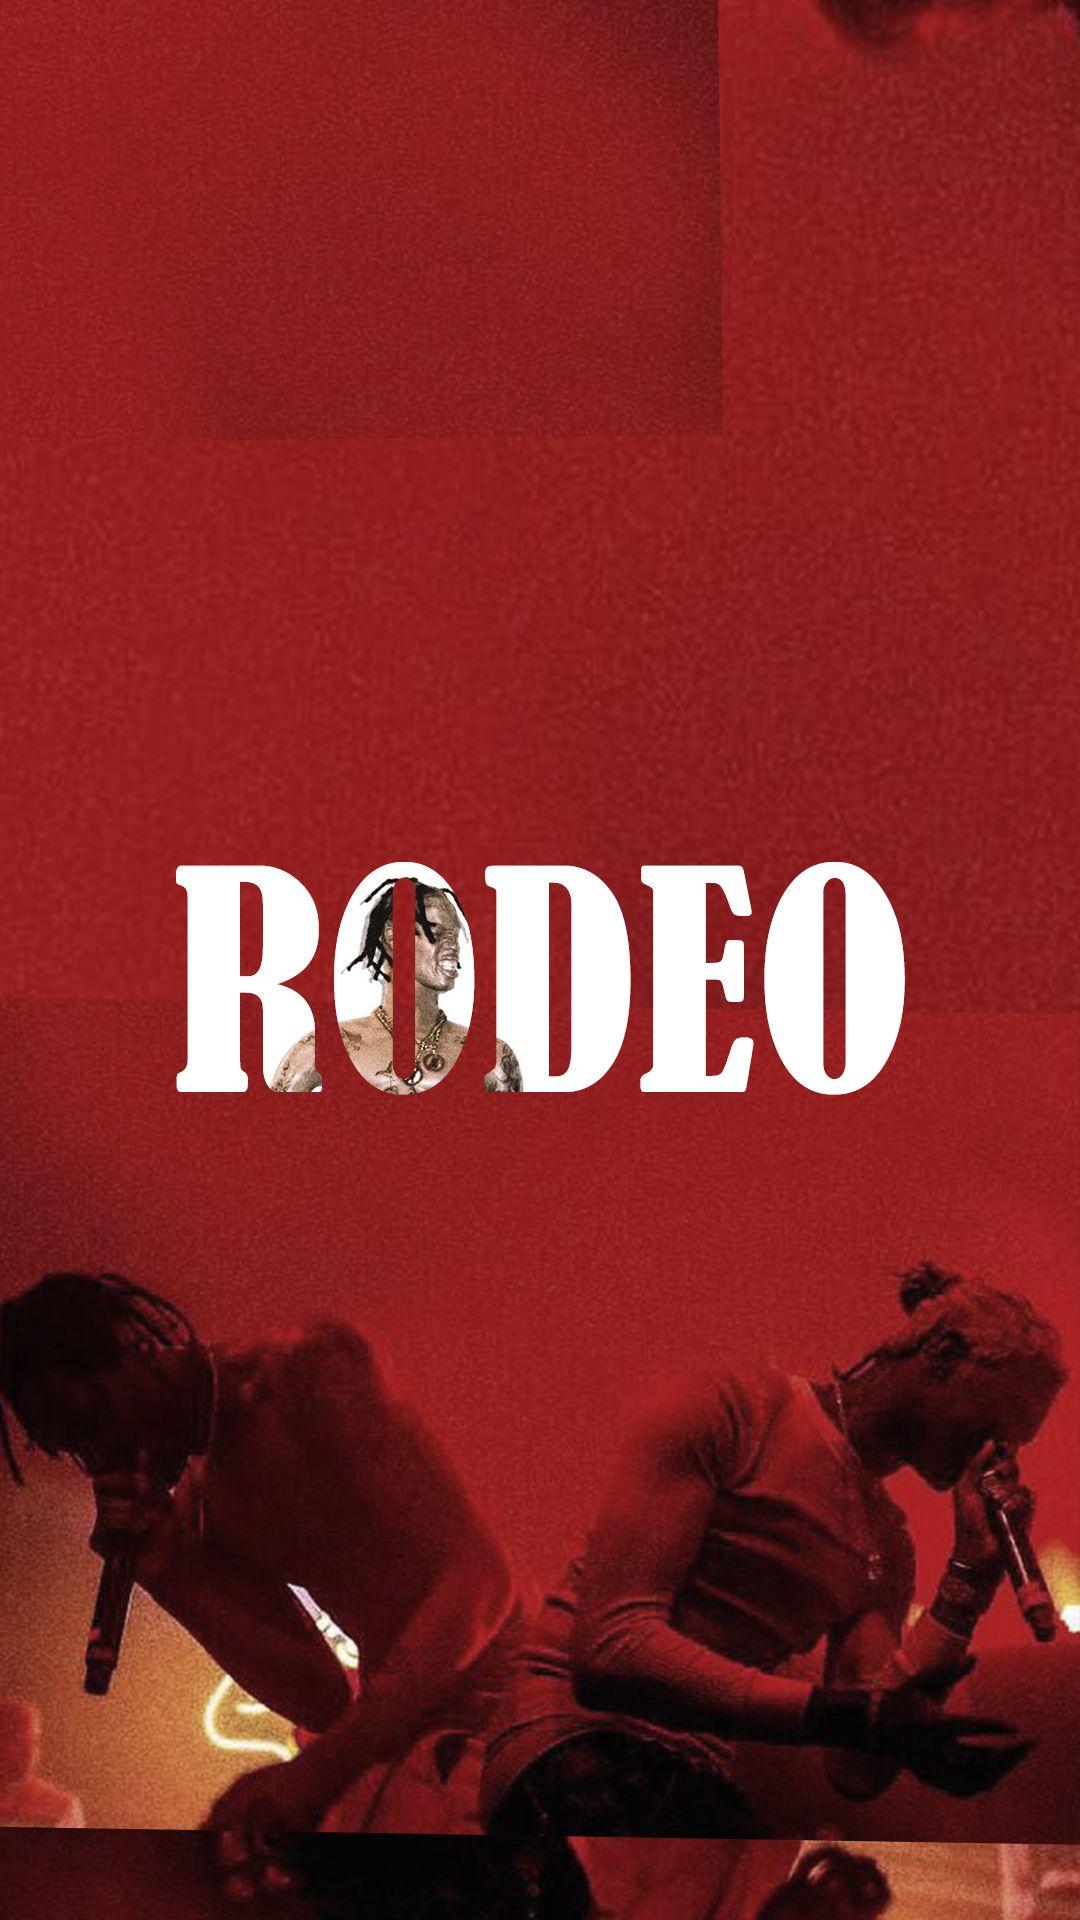 LA FLAME x RODEO iPhone 6 Wallpaper makes the grass grow